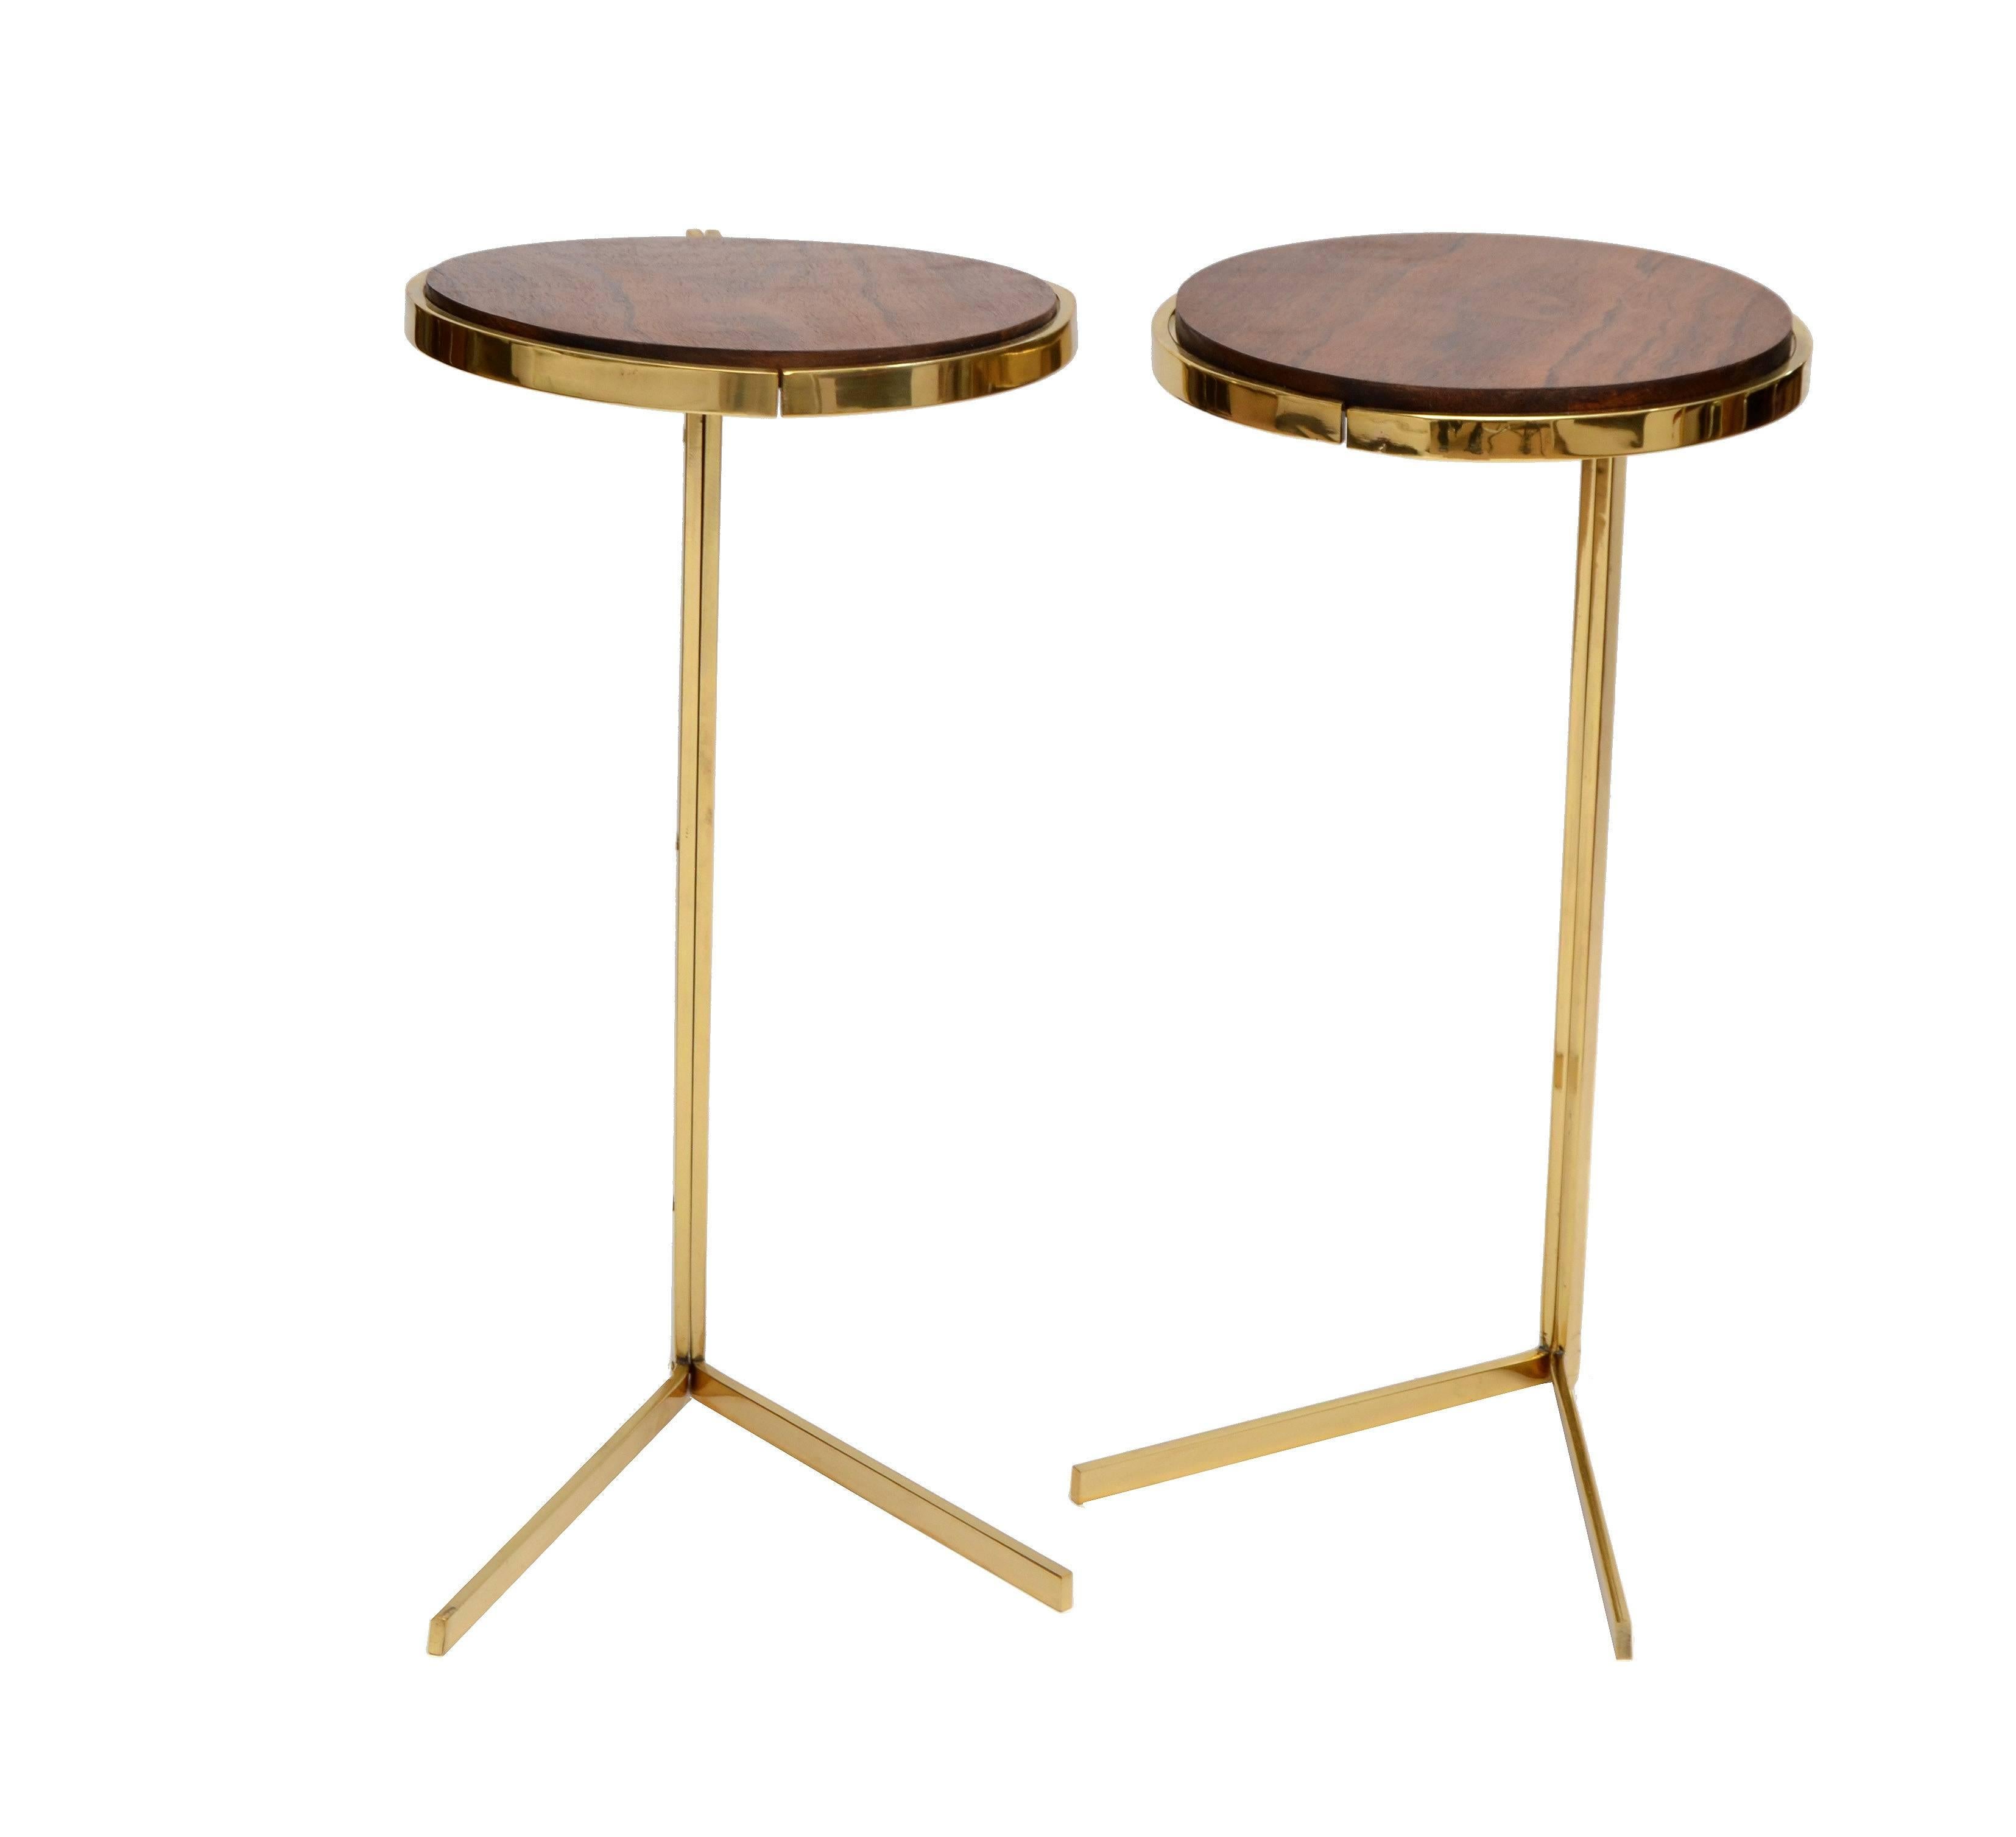 Unique Art Deco tables in brass and topped with exotic Brazilian hardwood.
Can be used as side table or martini table next to your favorite chair.

 